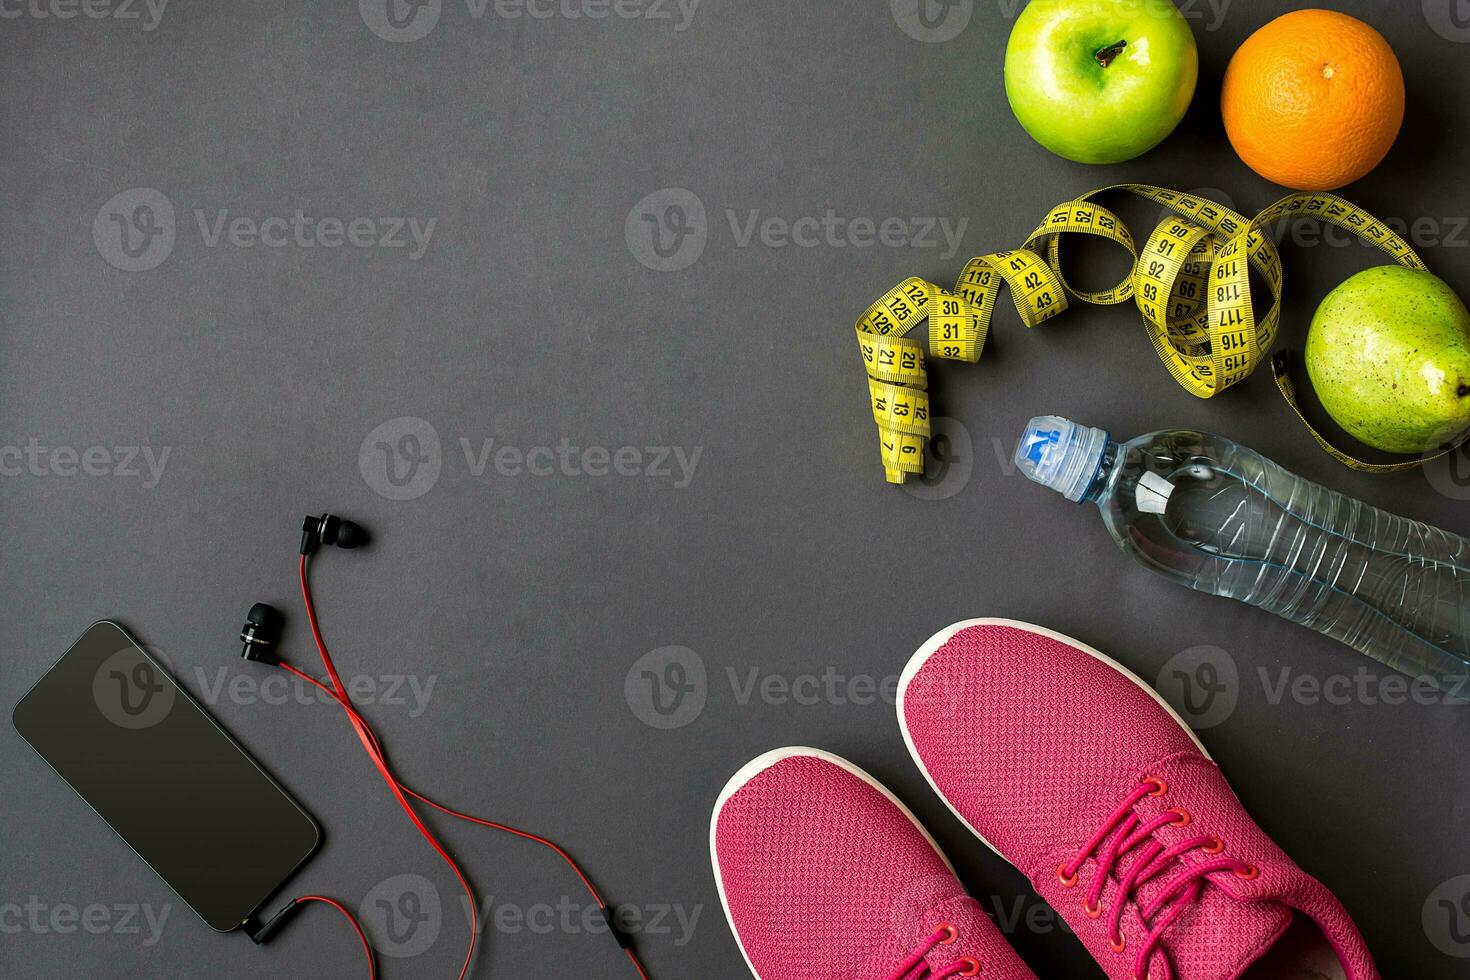 Workout plan with fitness food and equipment on gray background, top view photo